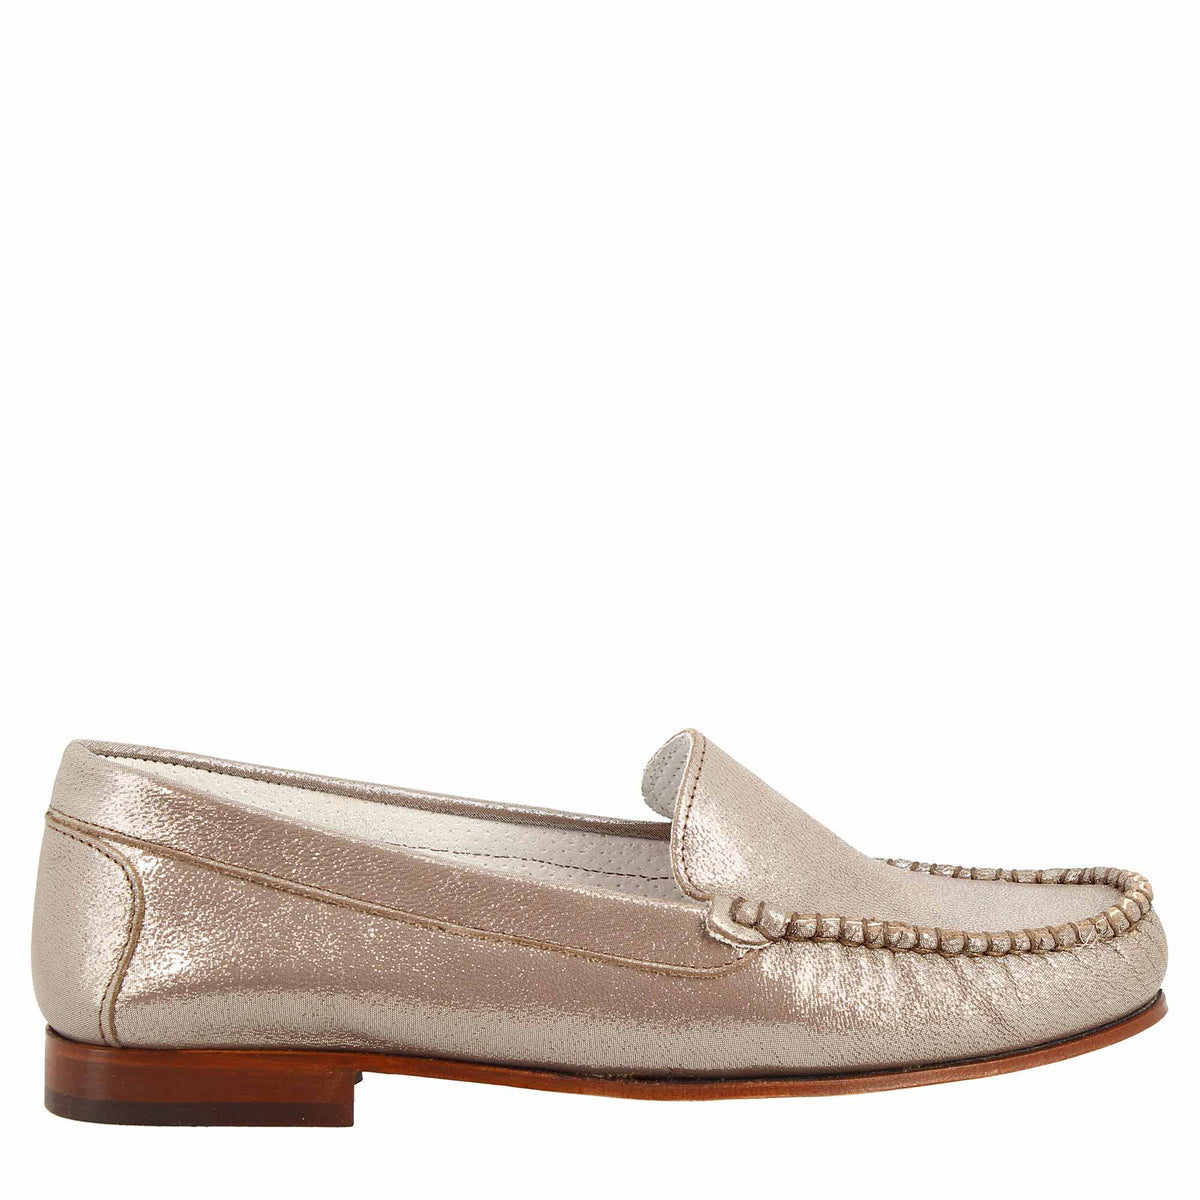 Handmade loafers for women in platinum leather